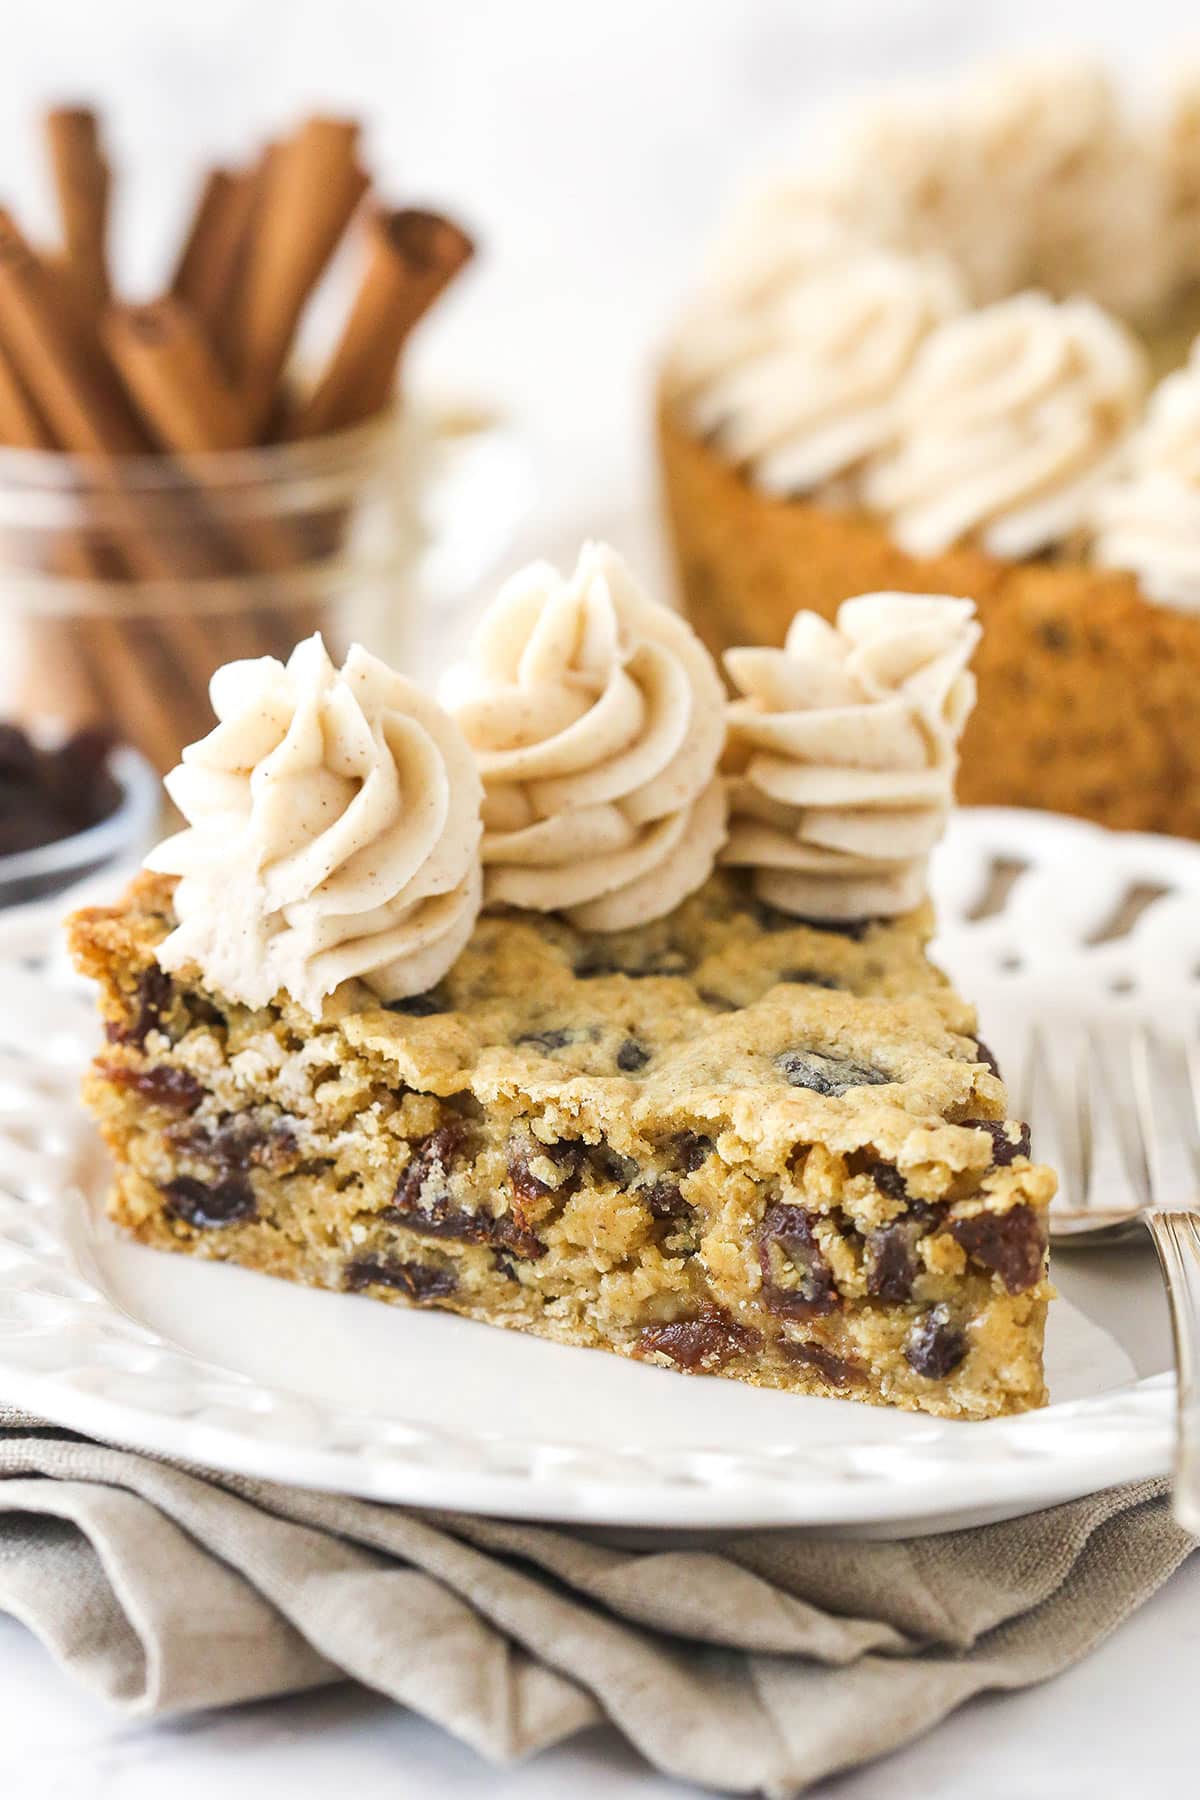 A slice of oatmeal raisin cookie cake on a plate with a fork.